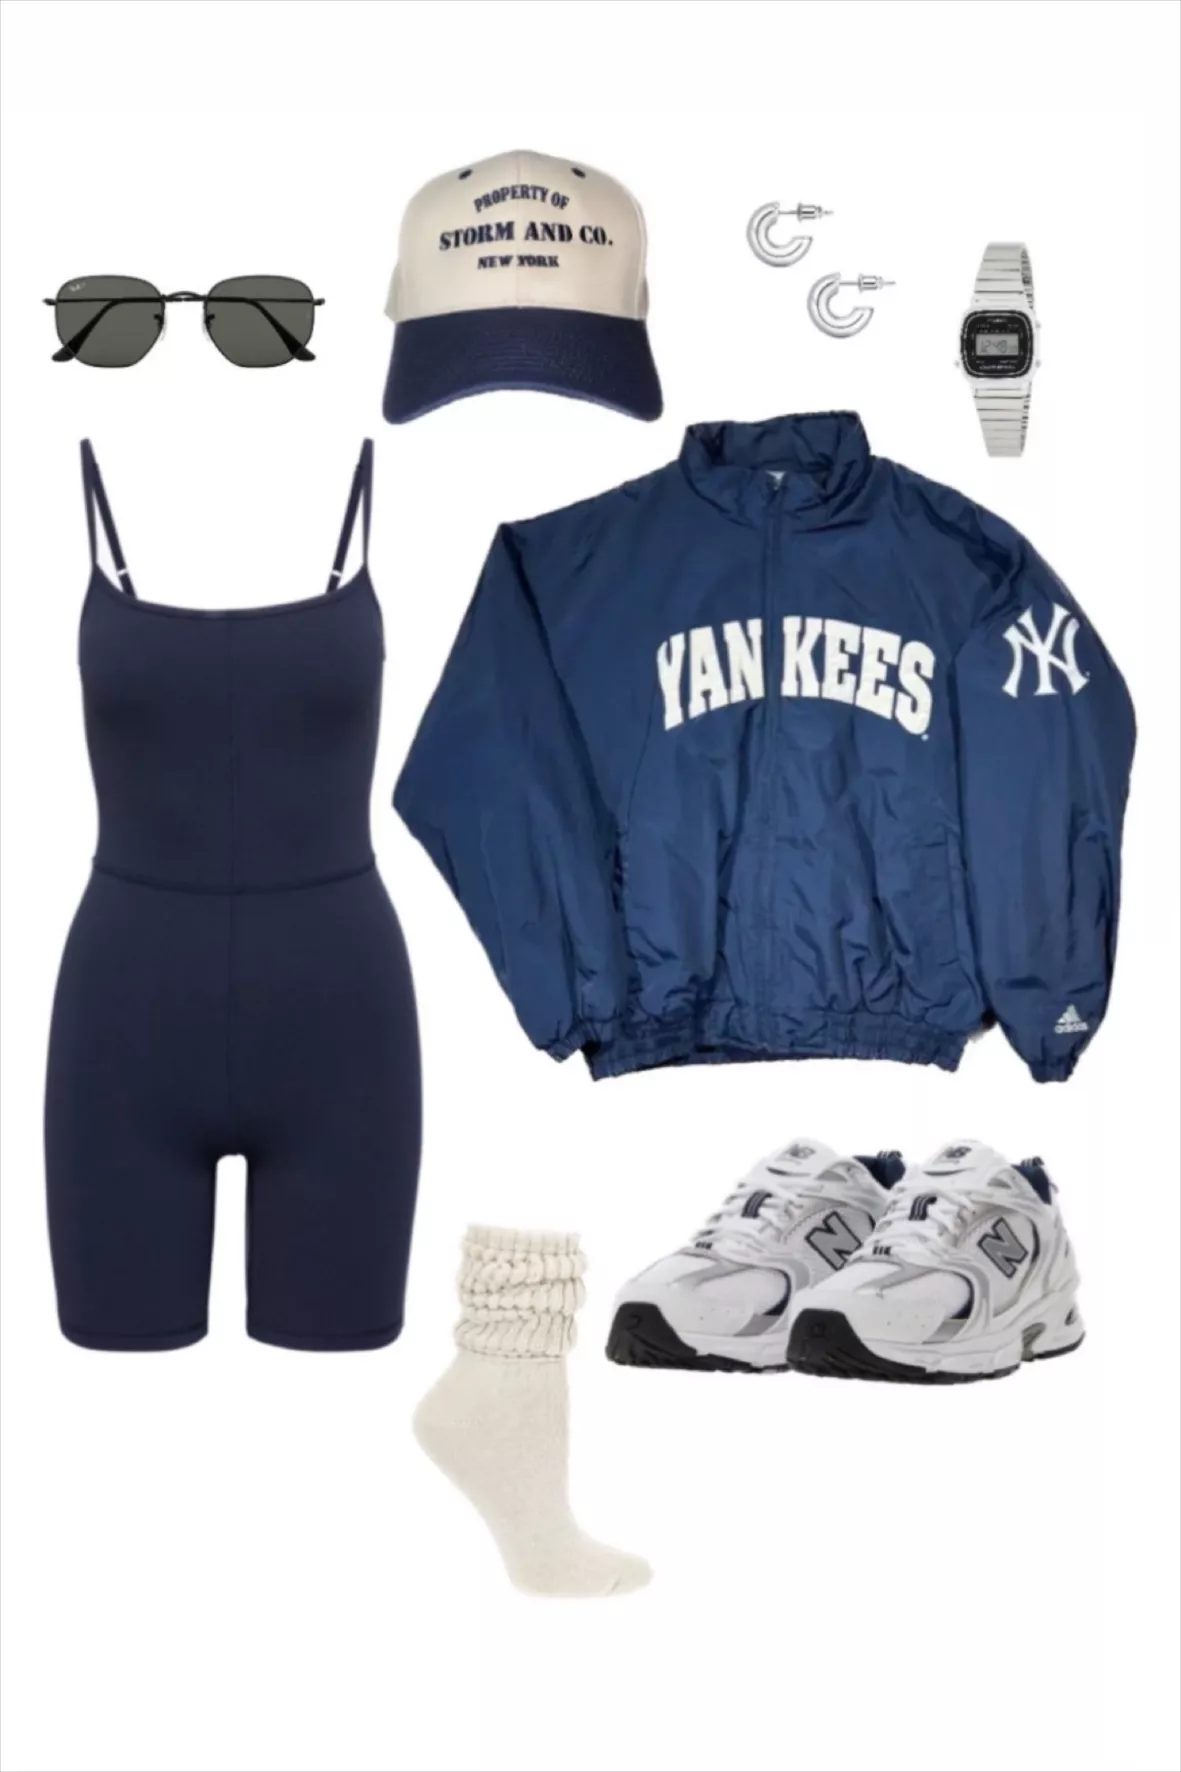 Yankees game outfit ideas  Baseball game outfits, Baseball outfit, Gameday  outfit